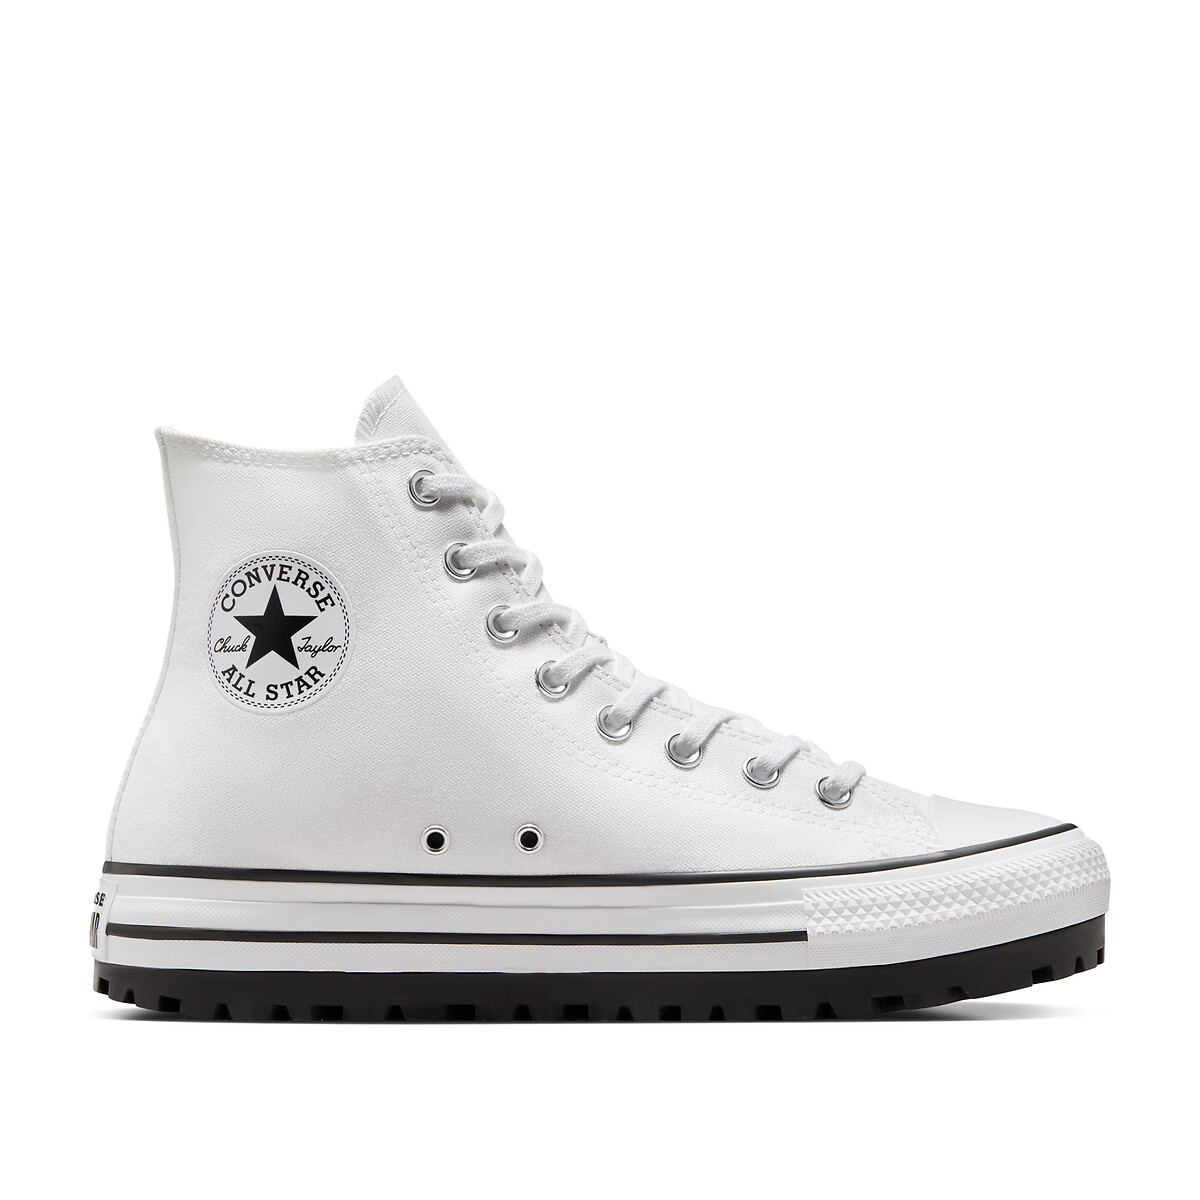 Image of Chuck Taylor All Star City Trek High Top Trainers in Canvas